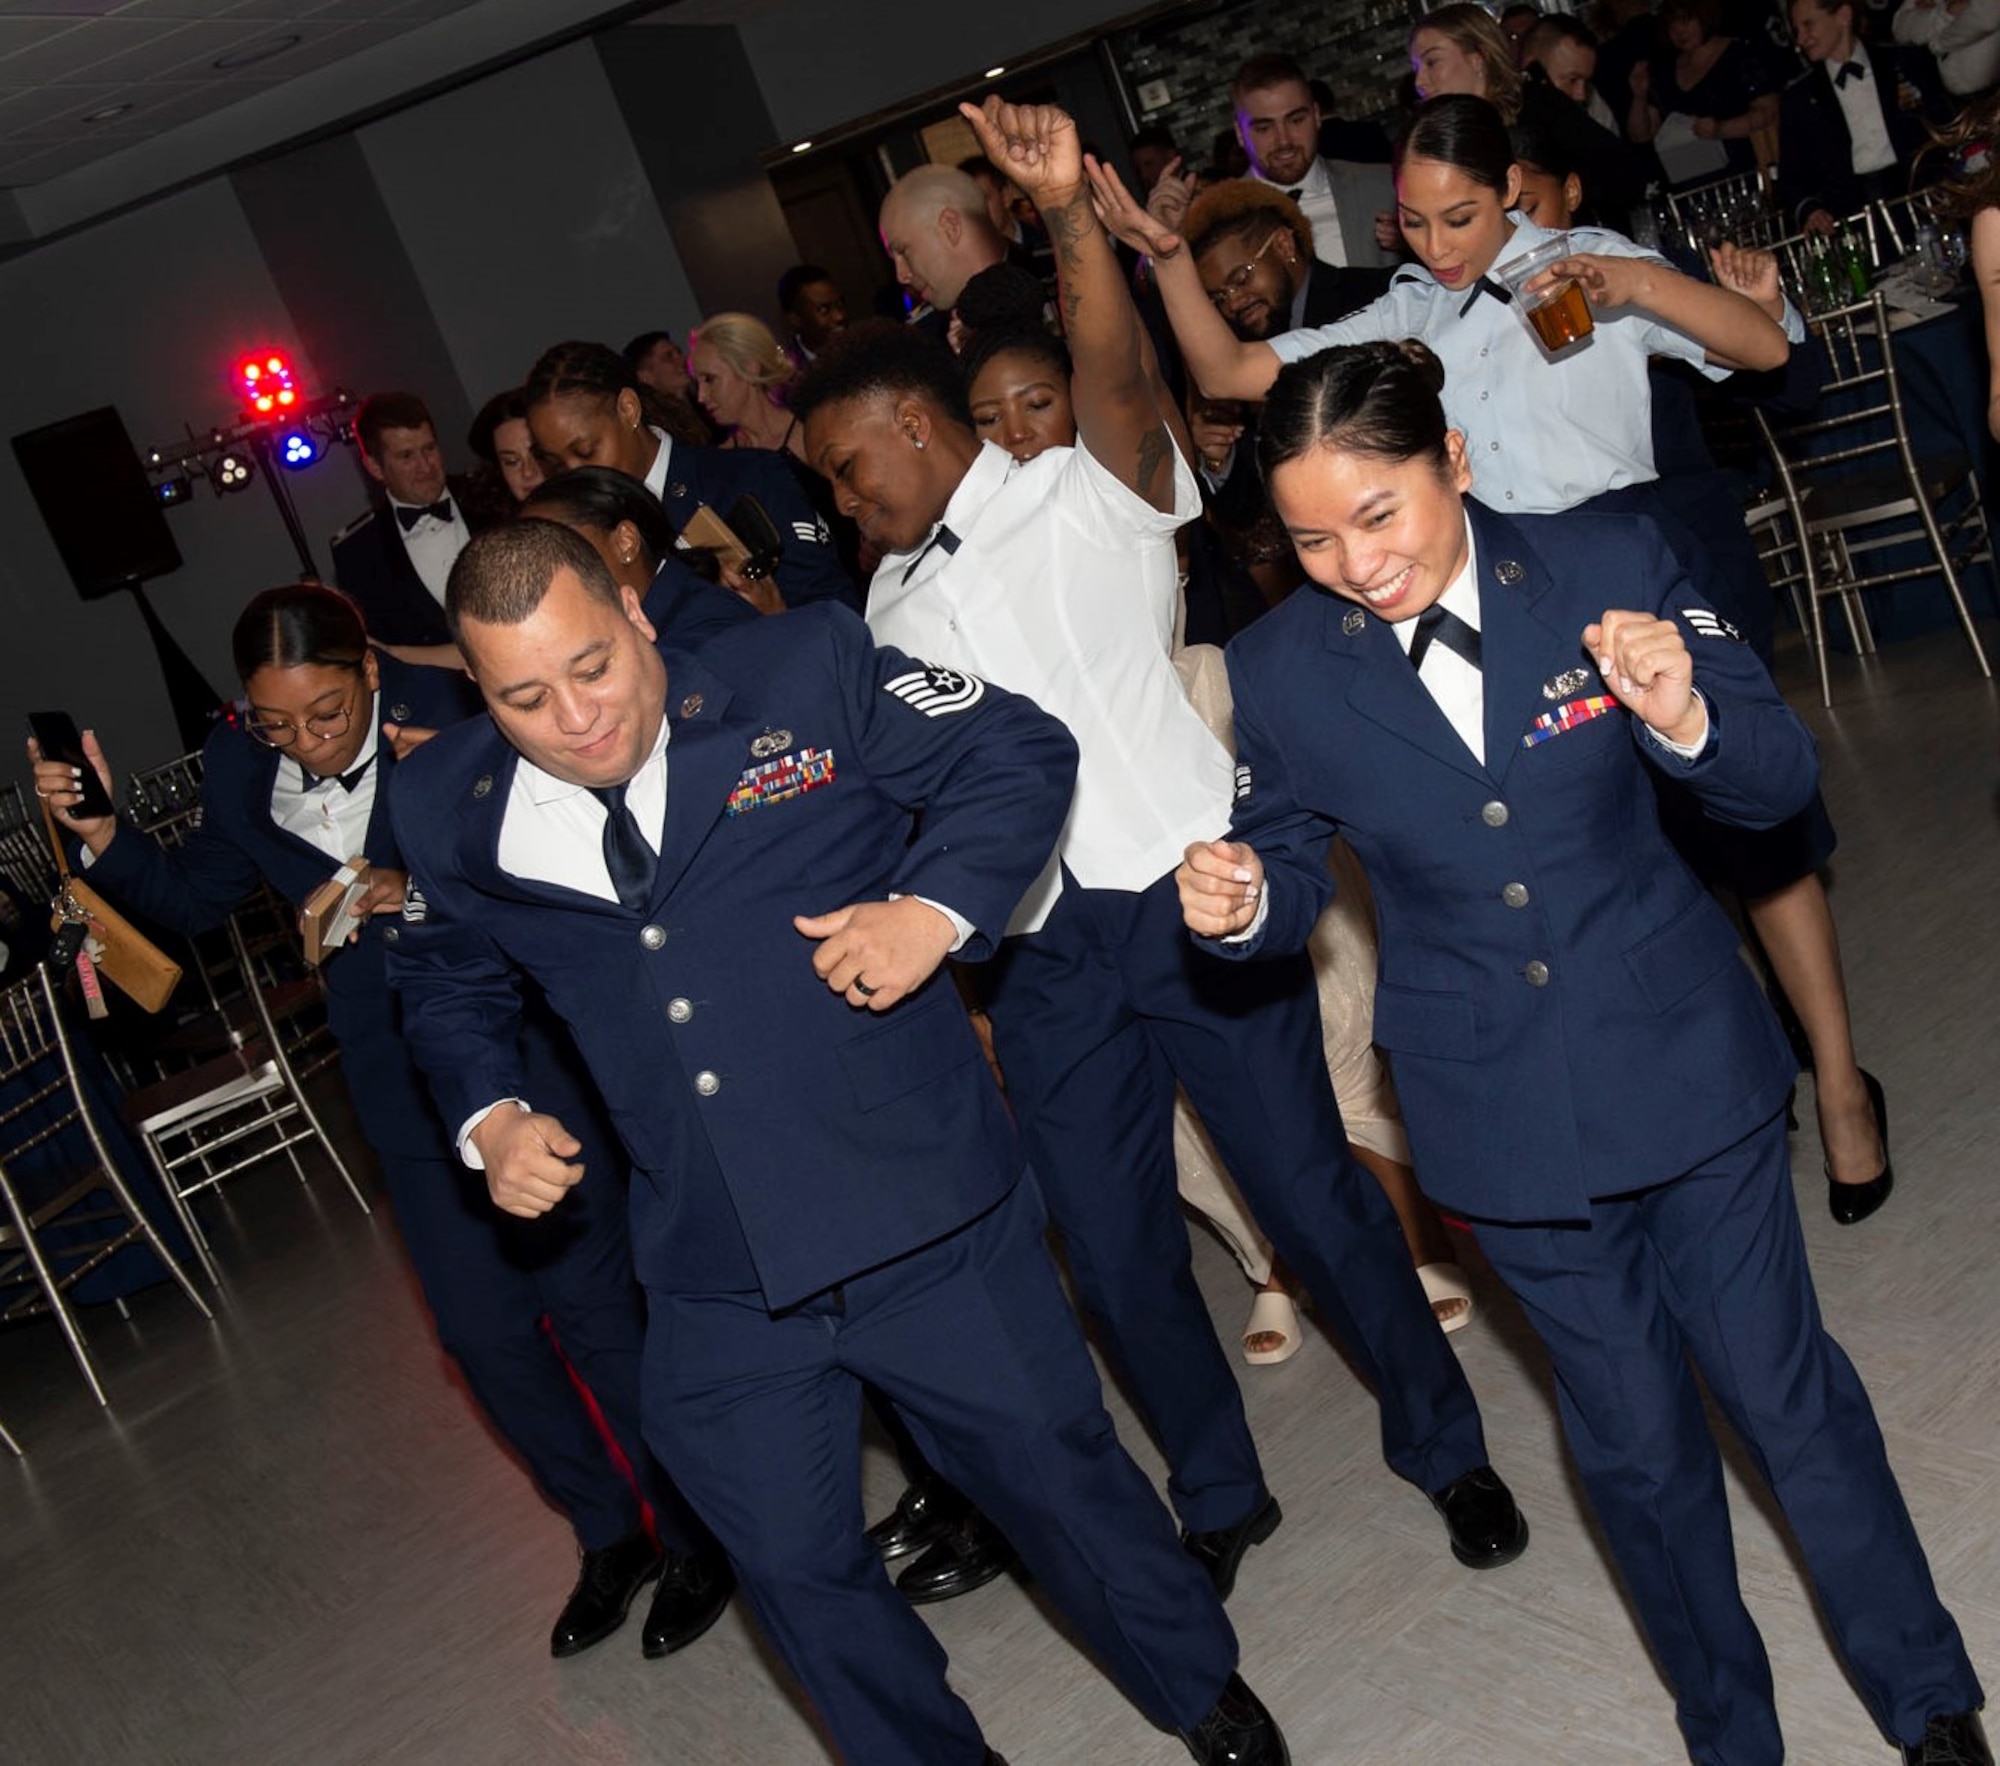 Members of the 434th Air Refueling Wing bust a move on the dance floor during Grissom's 80th Anniversary Ball. The wing celebrated both the unit, and the base's long history and announced its annual award winners. Photo by Master Sgt. Rachel Barton.